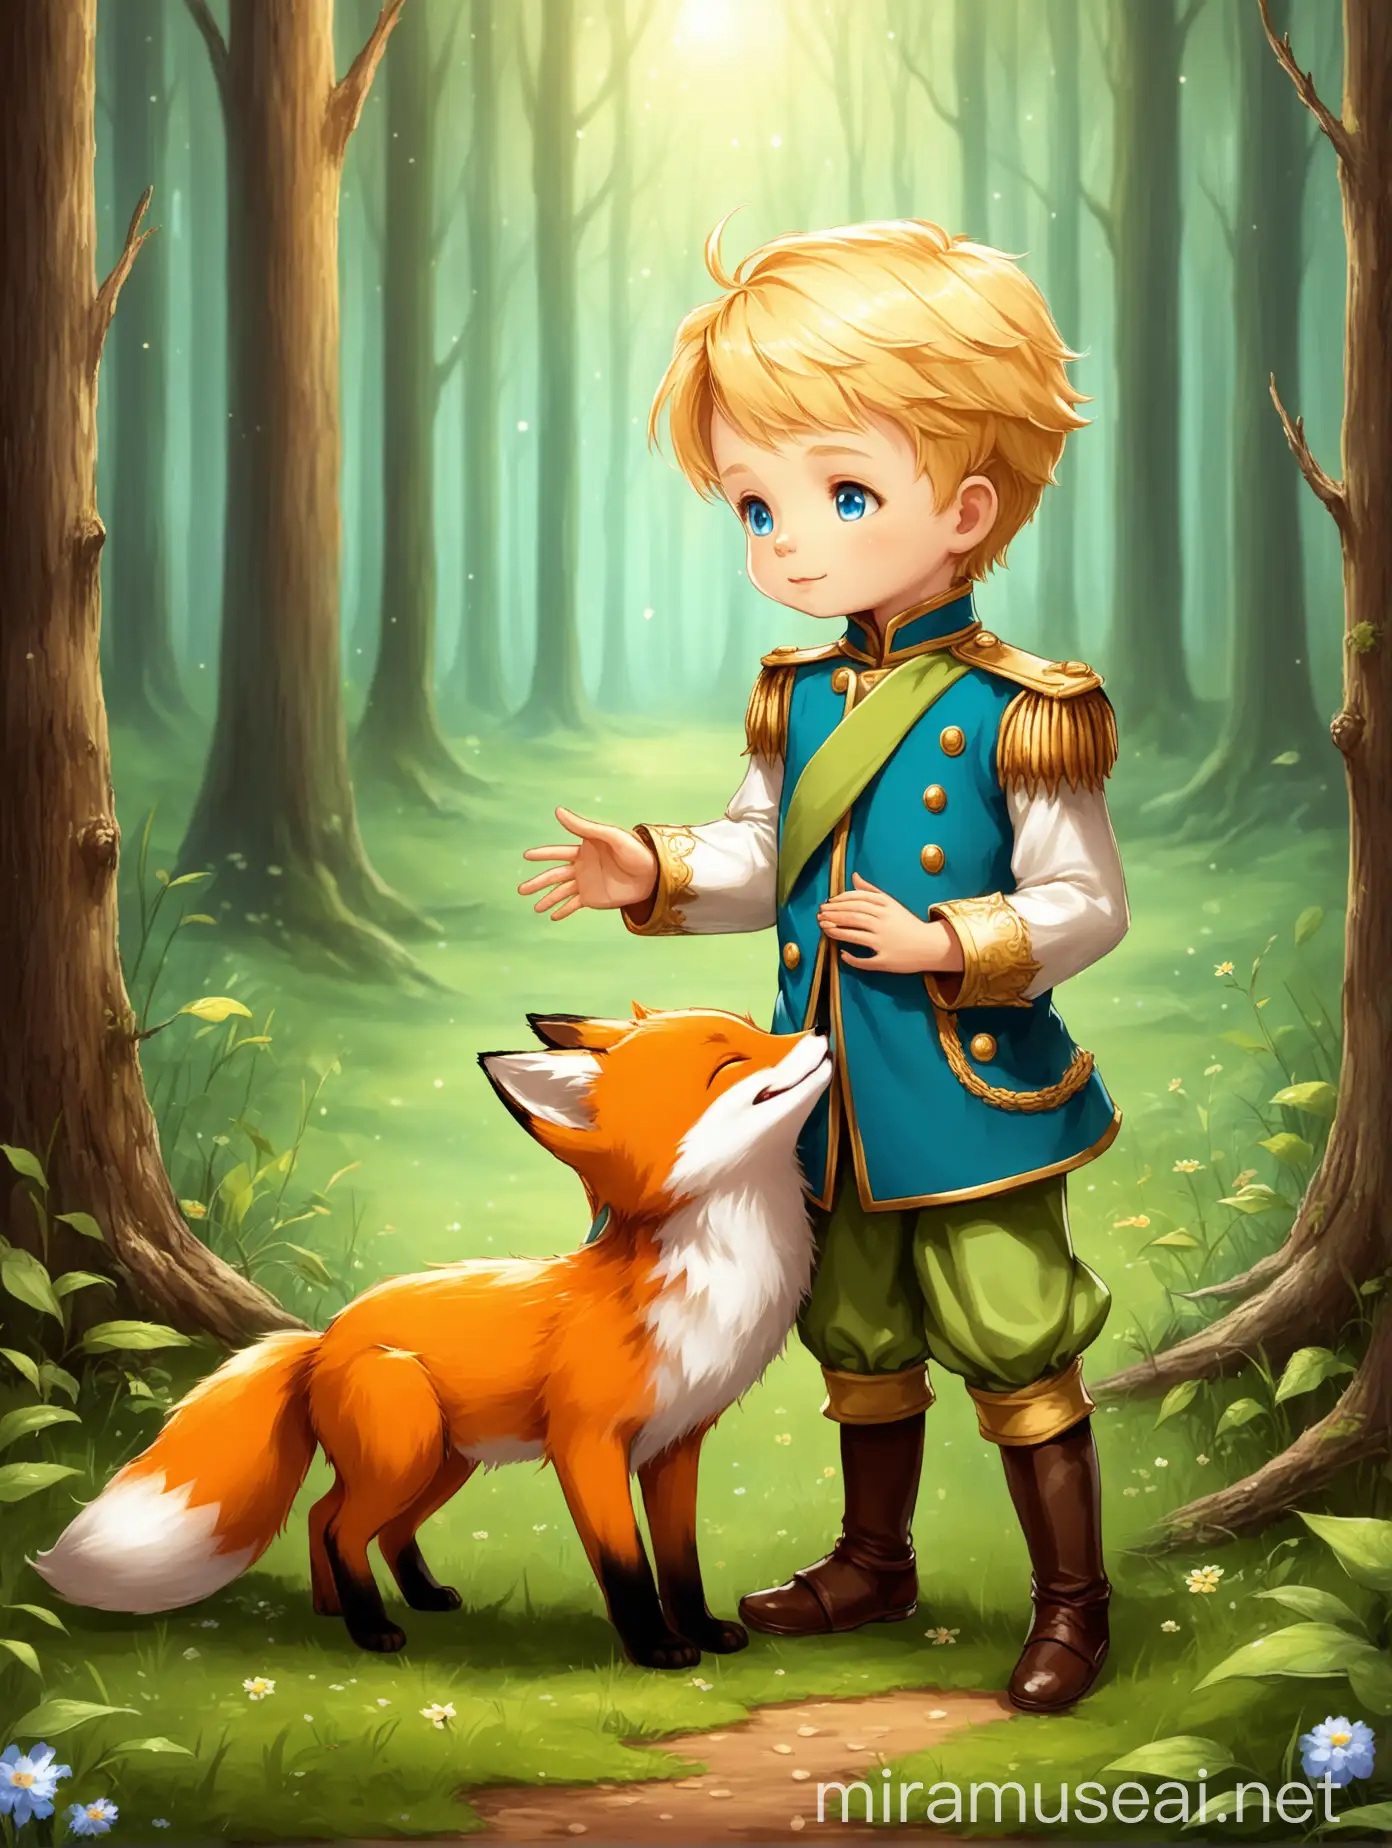 Little Prince and Pet Fox Cub Playing in Forest